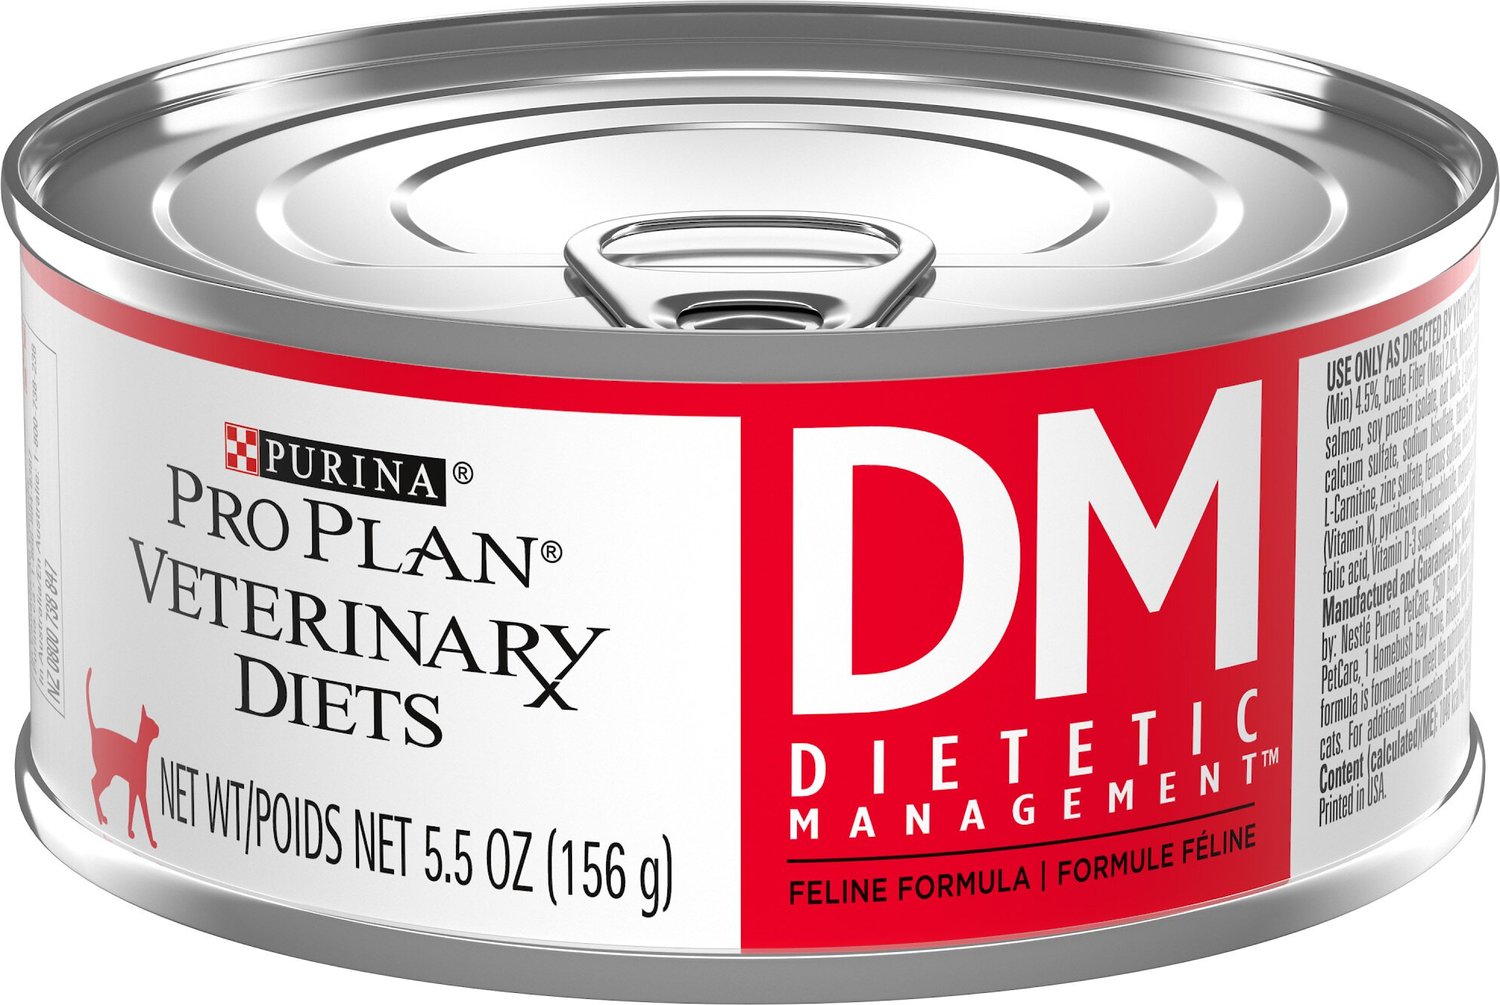 Purina Pro Plan Veterinary Diets DM Dietetic Management Formula Canned